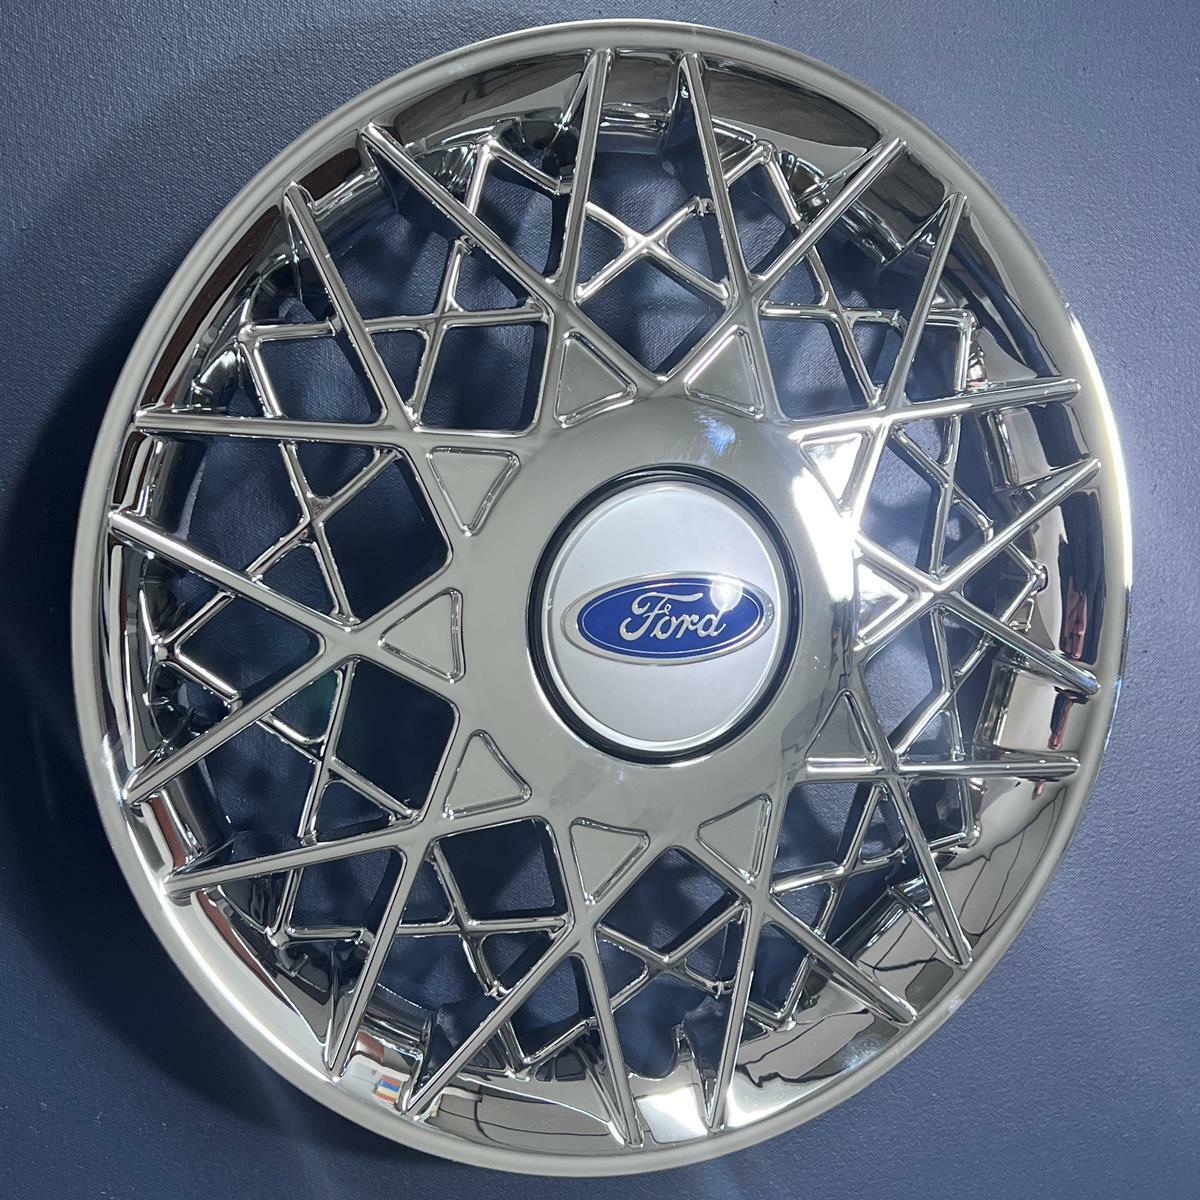 Primary image for ONE 1998-2002 Ford Crown Victoria 7007B 16" Hubcap Wheel Cover COPY + OEM Center